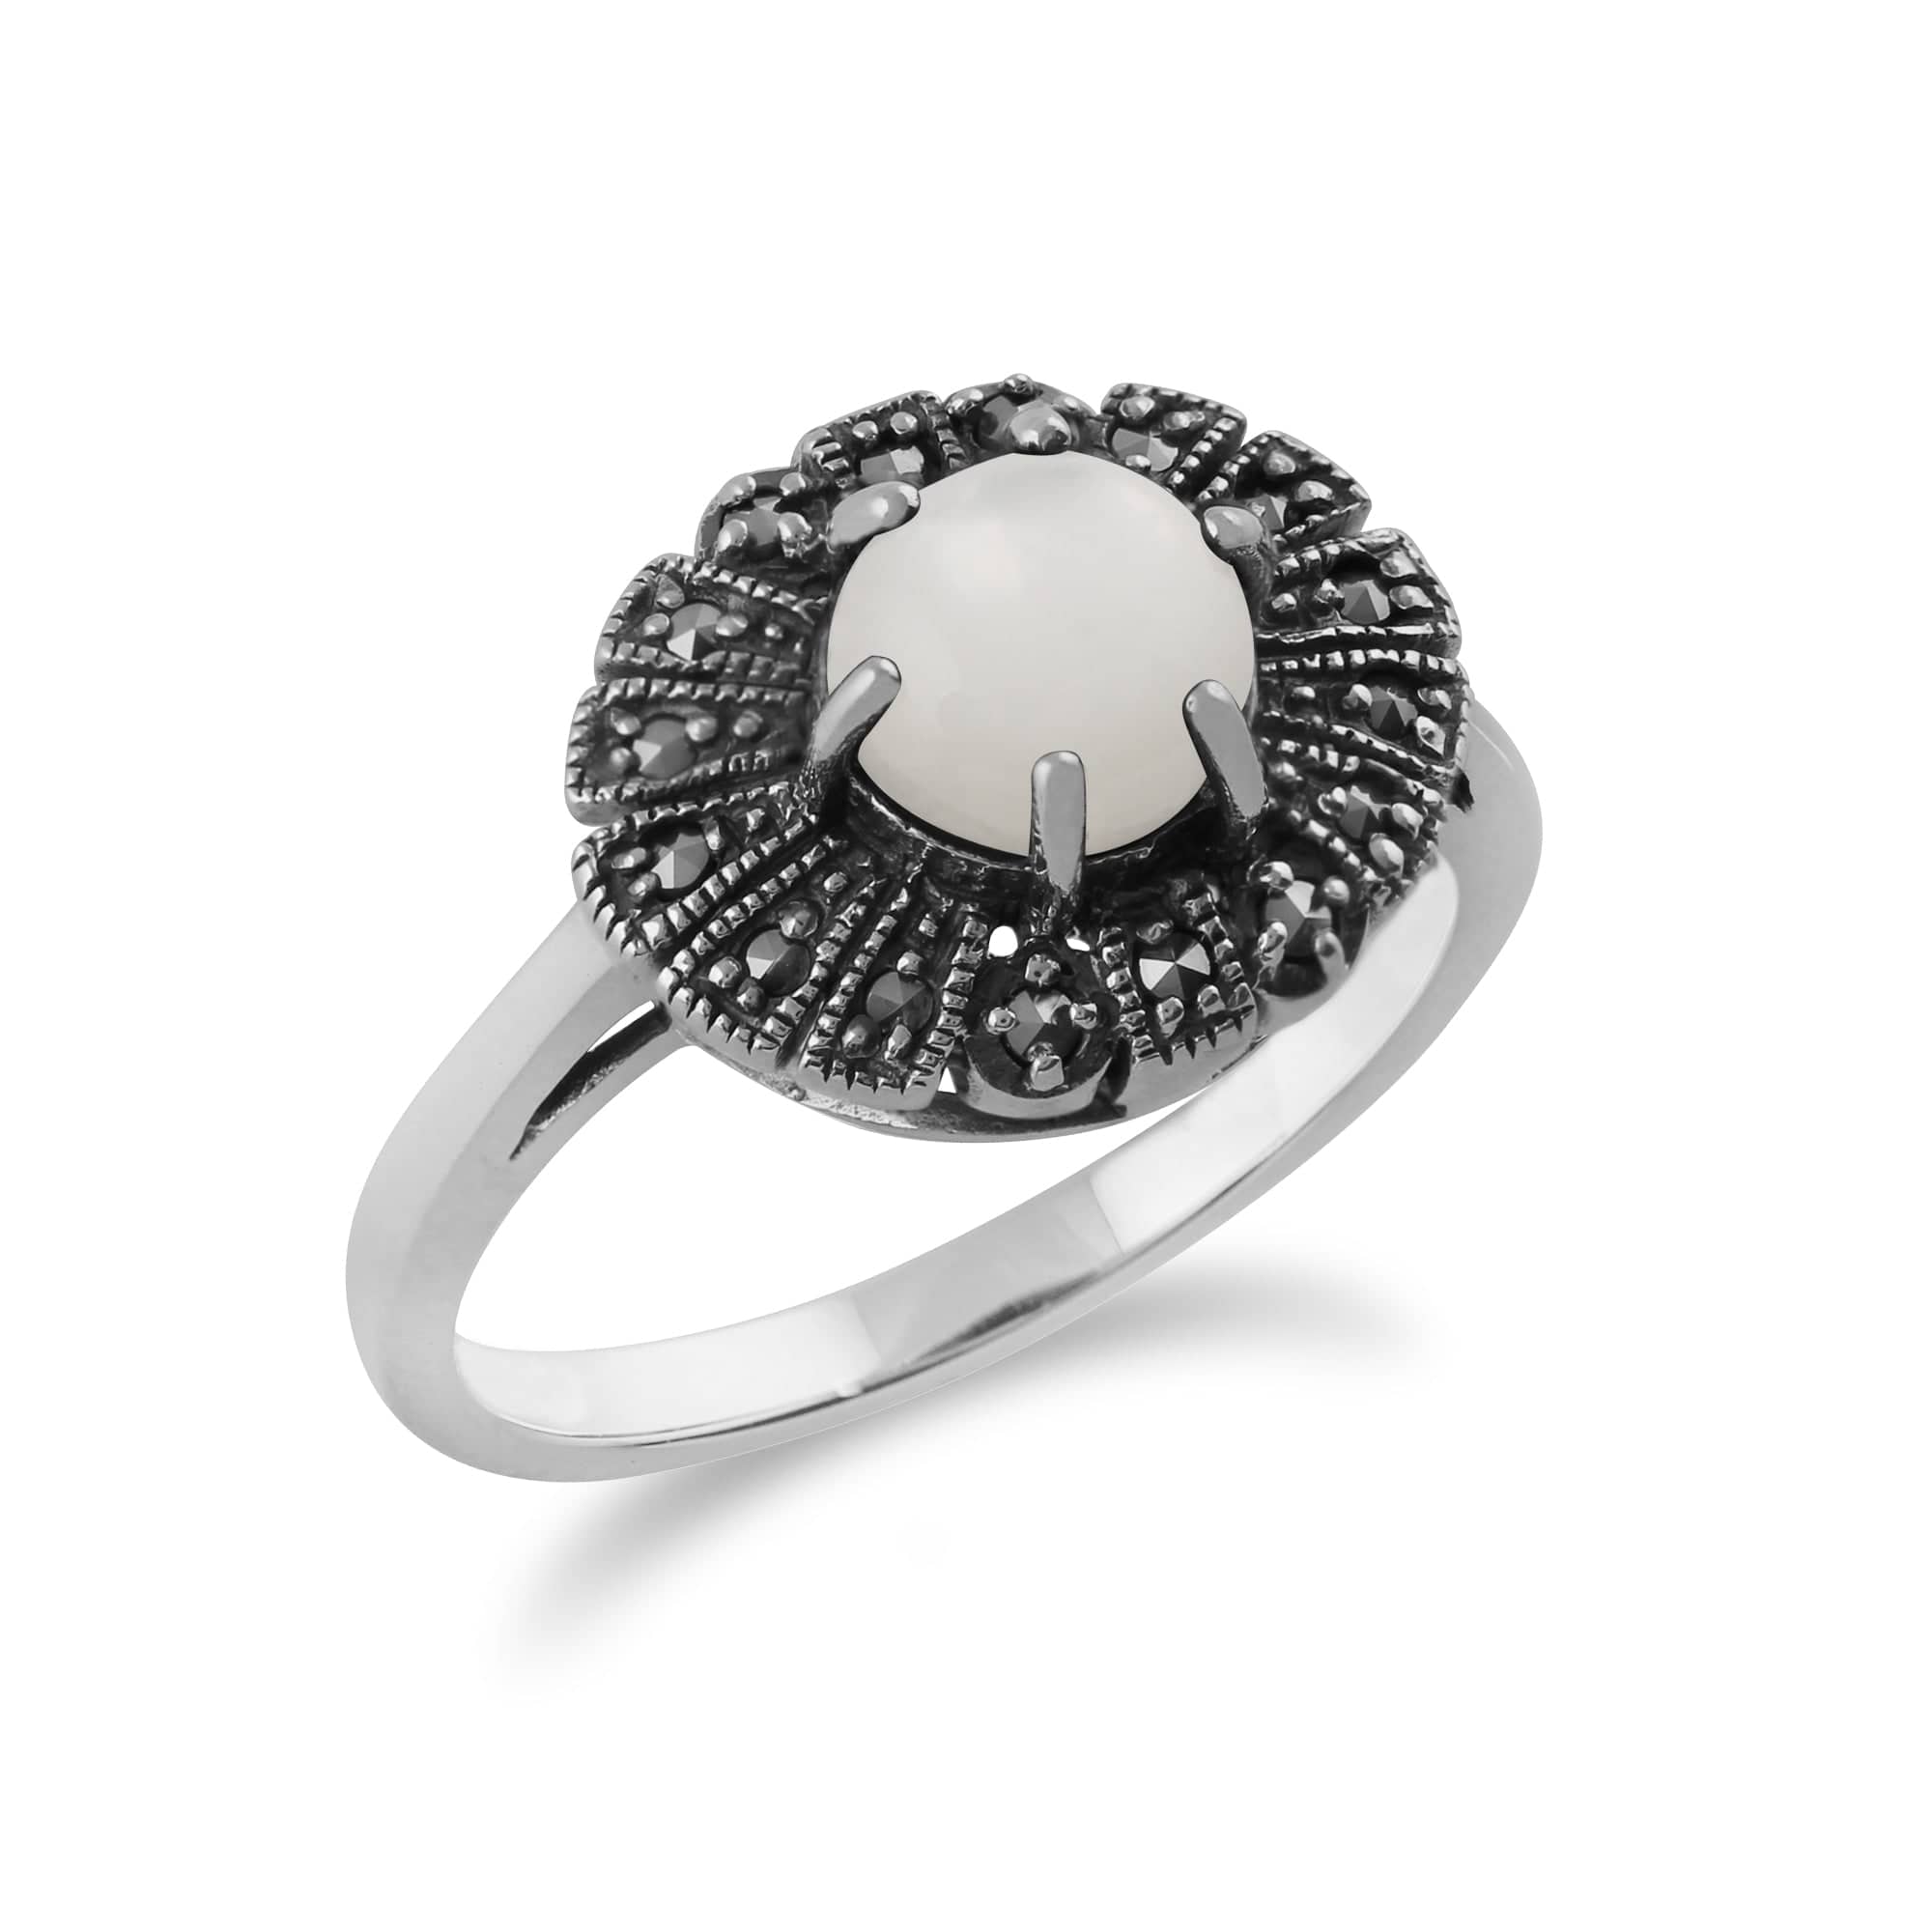 214R586903925 Gemondo 925 Sterling Silver 0.85ct Mother of Pearl & Marcasite Art Deco Ring 2